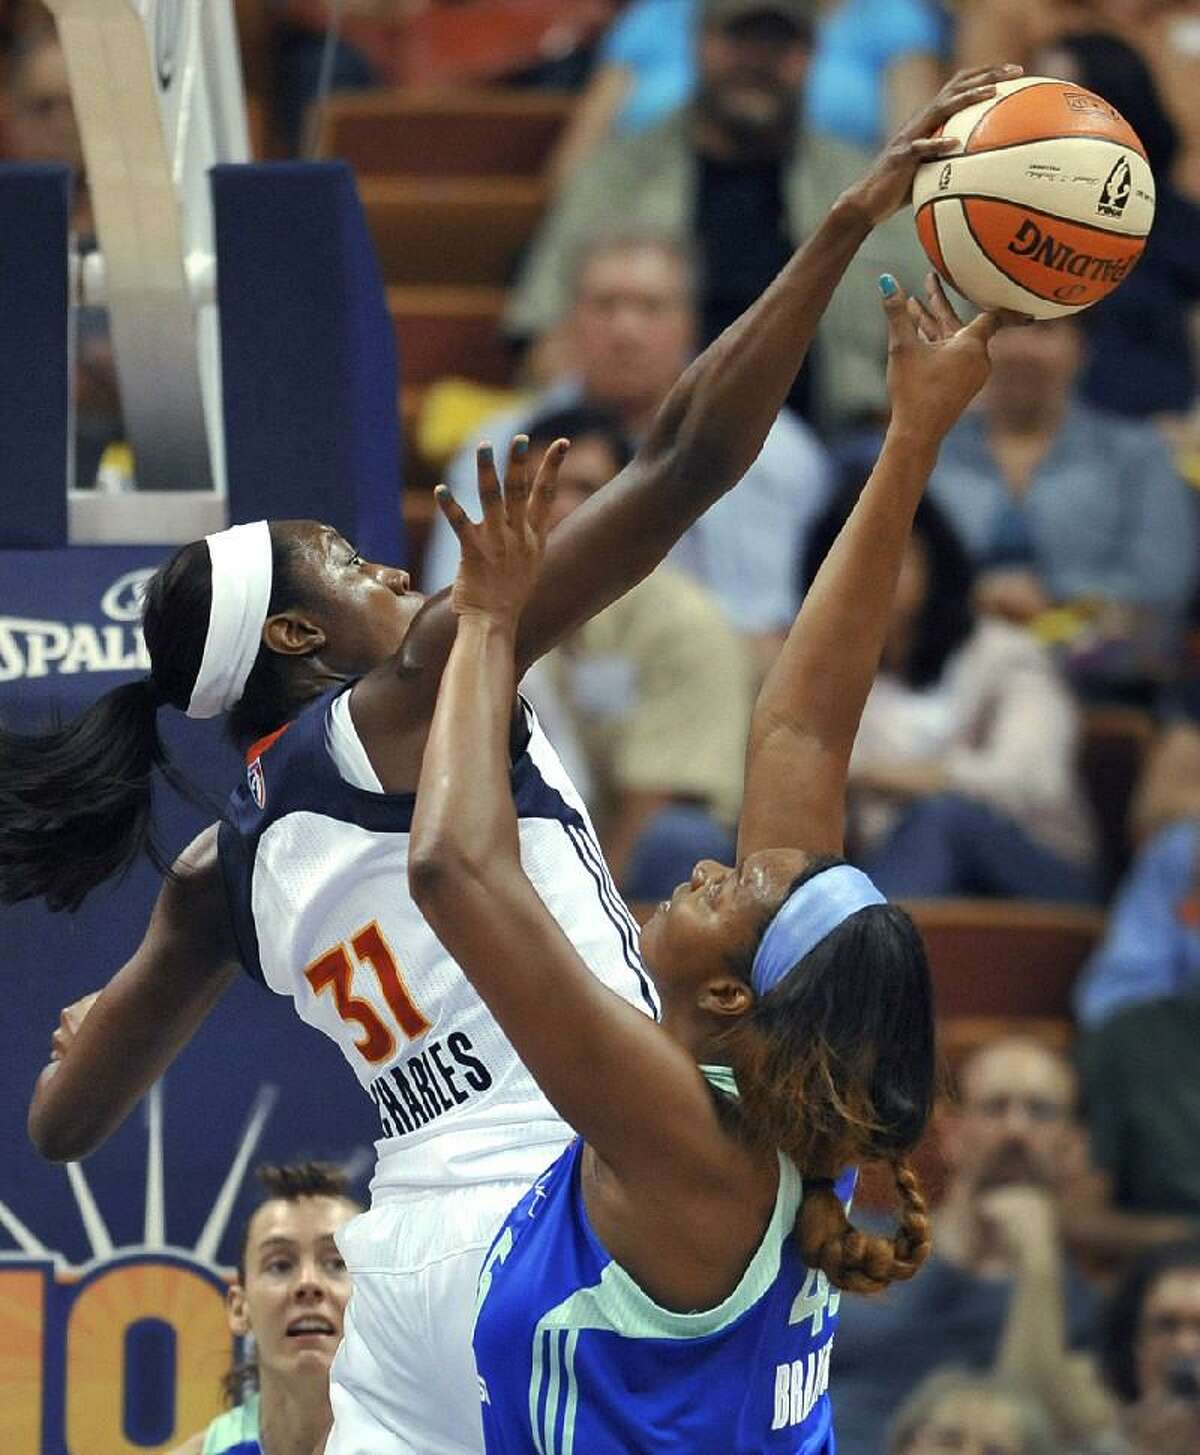 ASSOCIATED PRESS Connecticut Sun's Tina Charles, left, blocks a shot by New York Liberty's Kara Braxton in the first half of Friday's game in Uncasville. The Sun won 97-55.